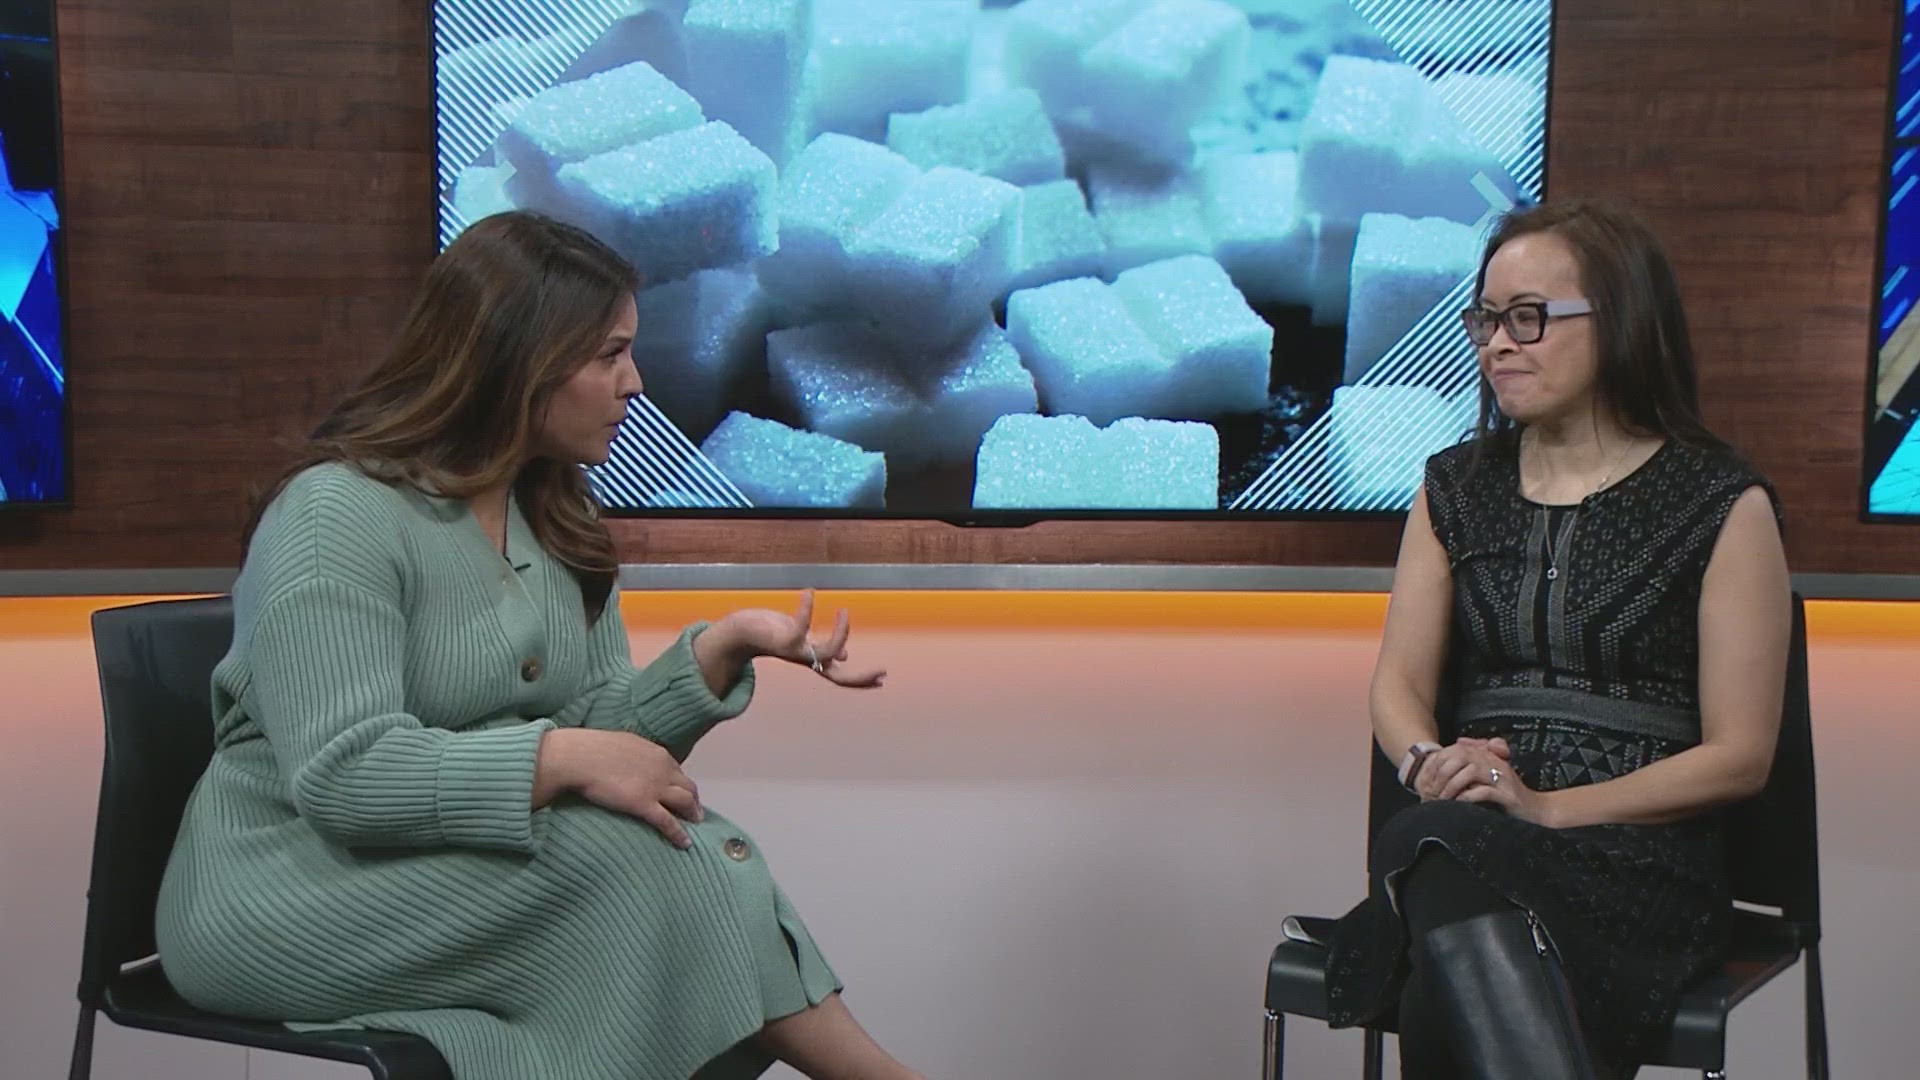 A new study found sugar replacement Erythritol is now linked to blood clots, strokes and heart attacks, Dr. Angela Tran joins us to discuss.